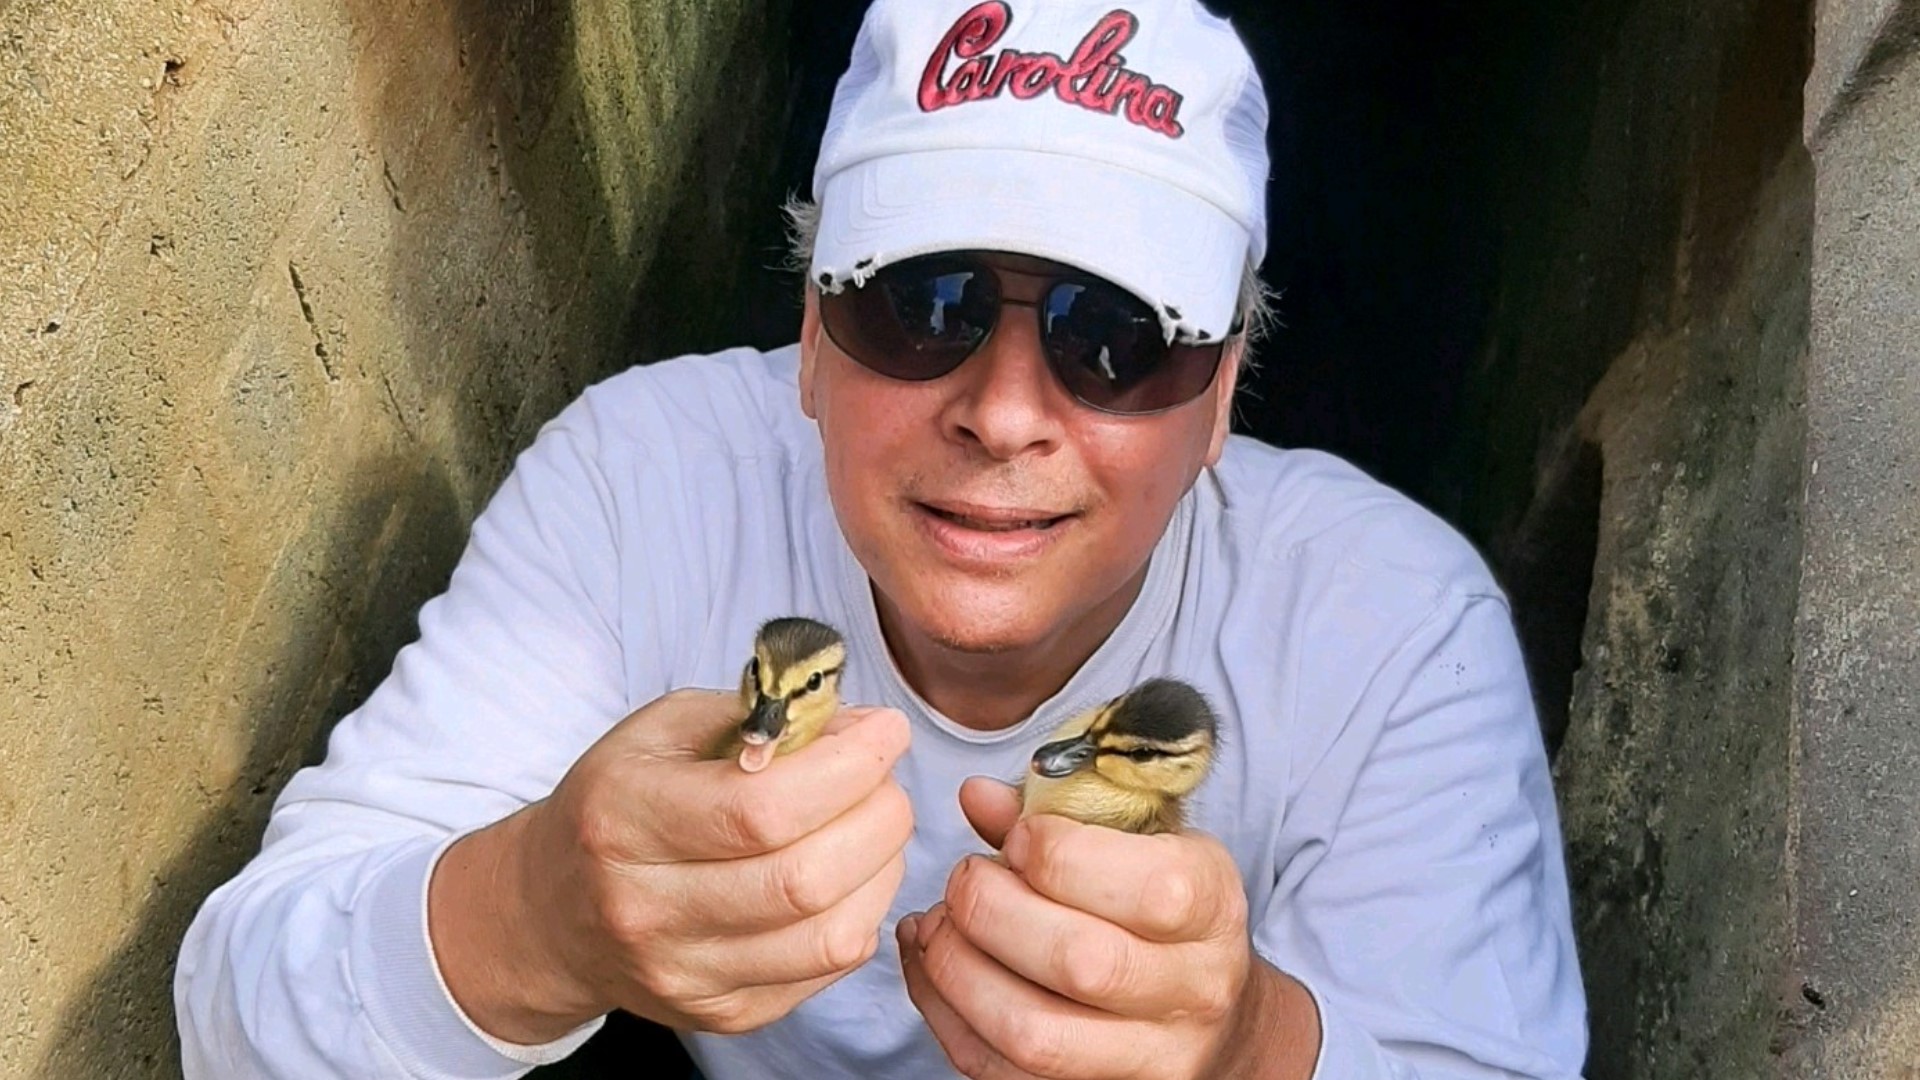 When the Good Samaritan noticed ducklings in a storm drain, he climbed down to rescue the baby animals.